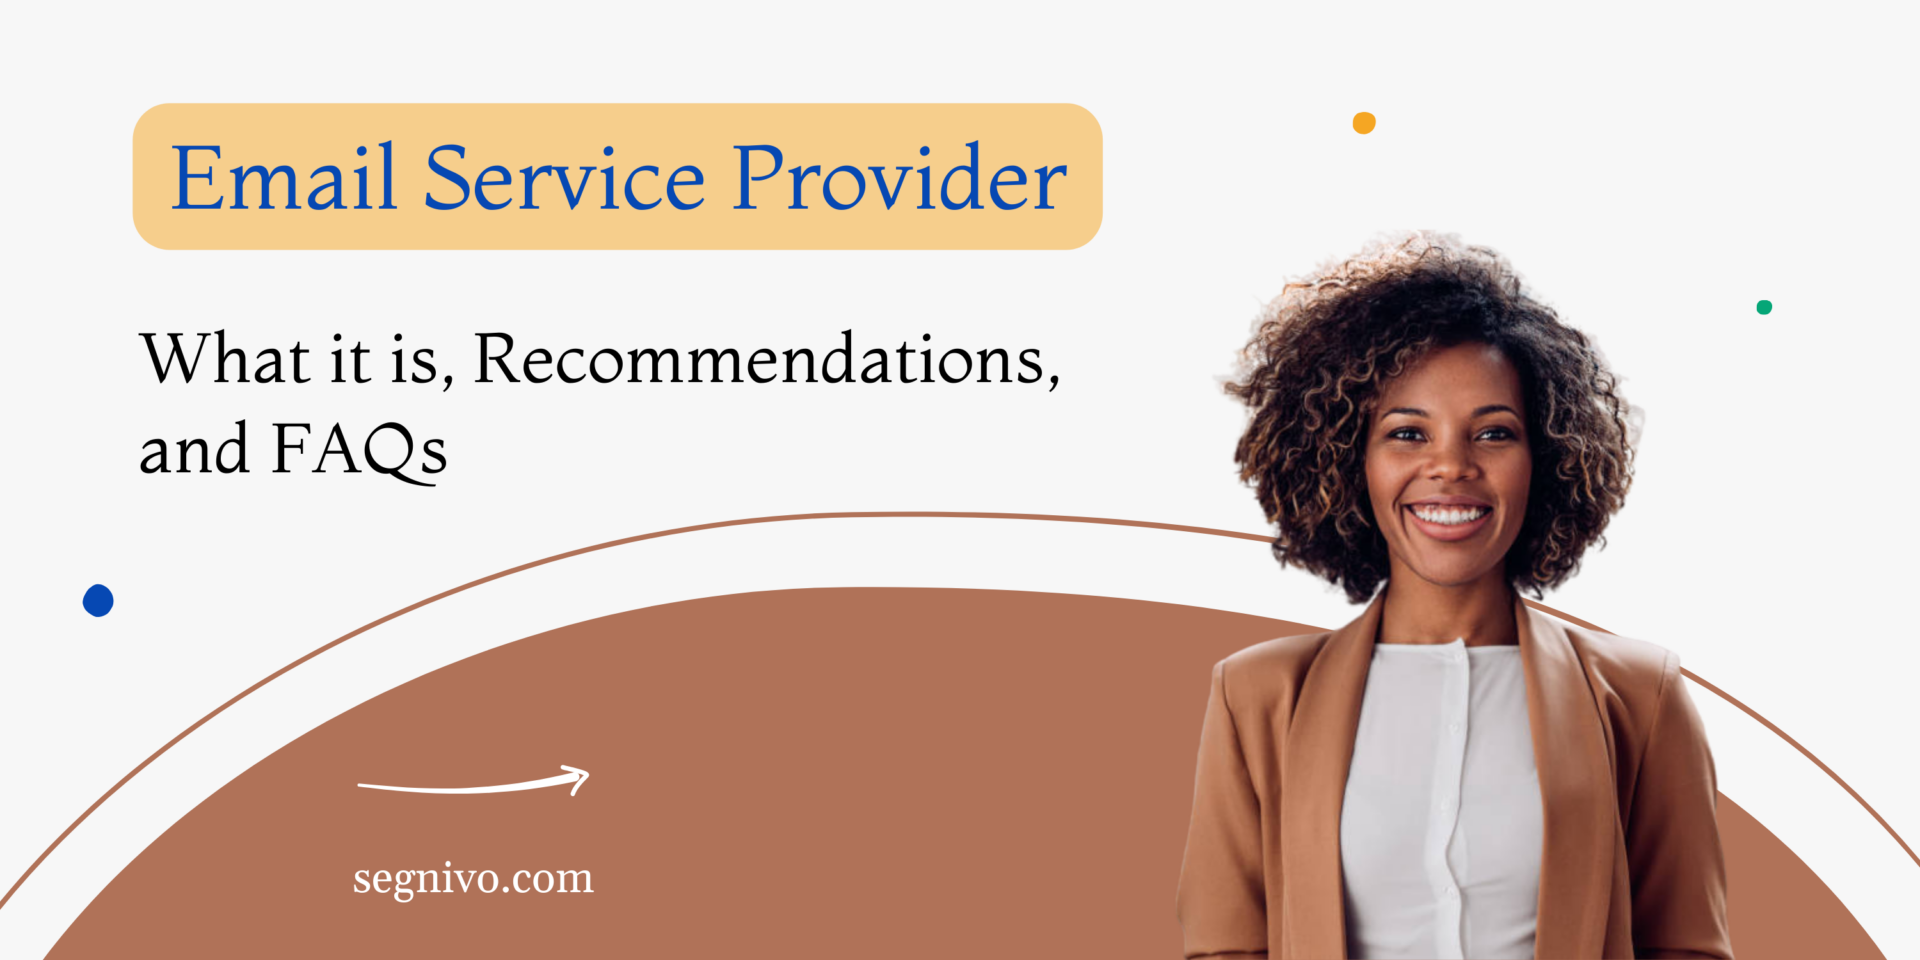 Email Service Provider